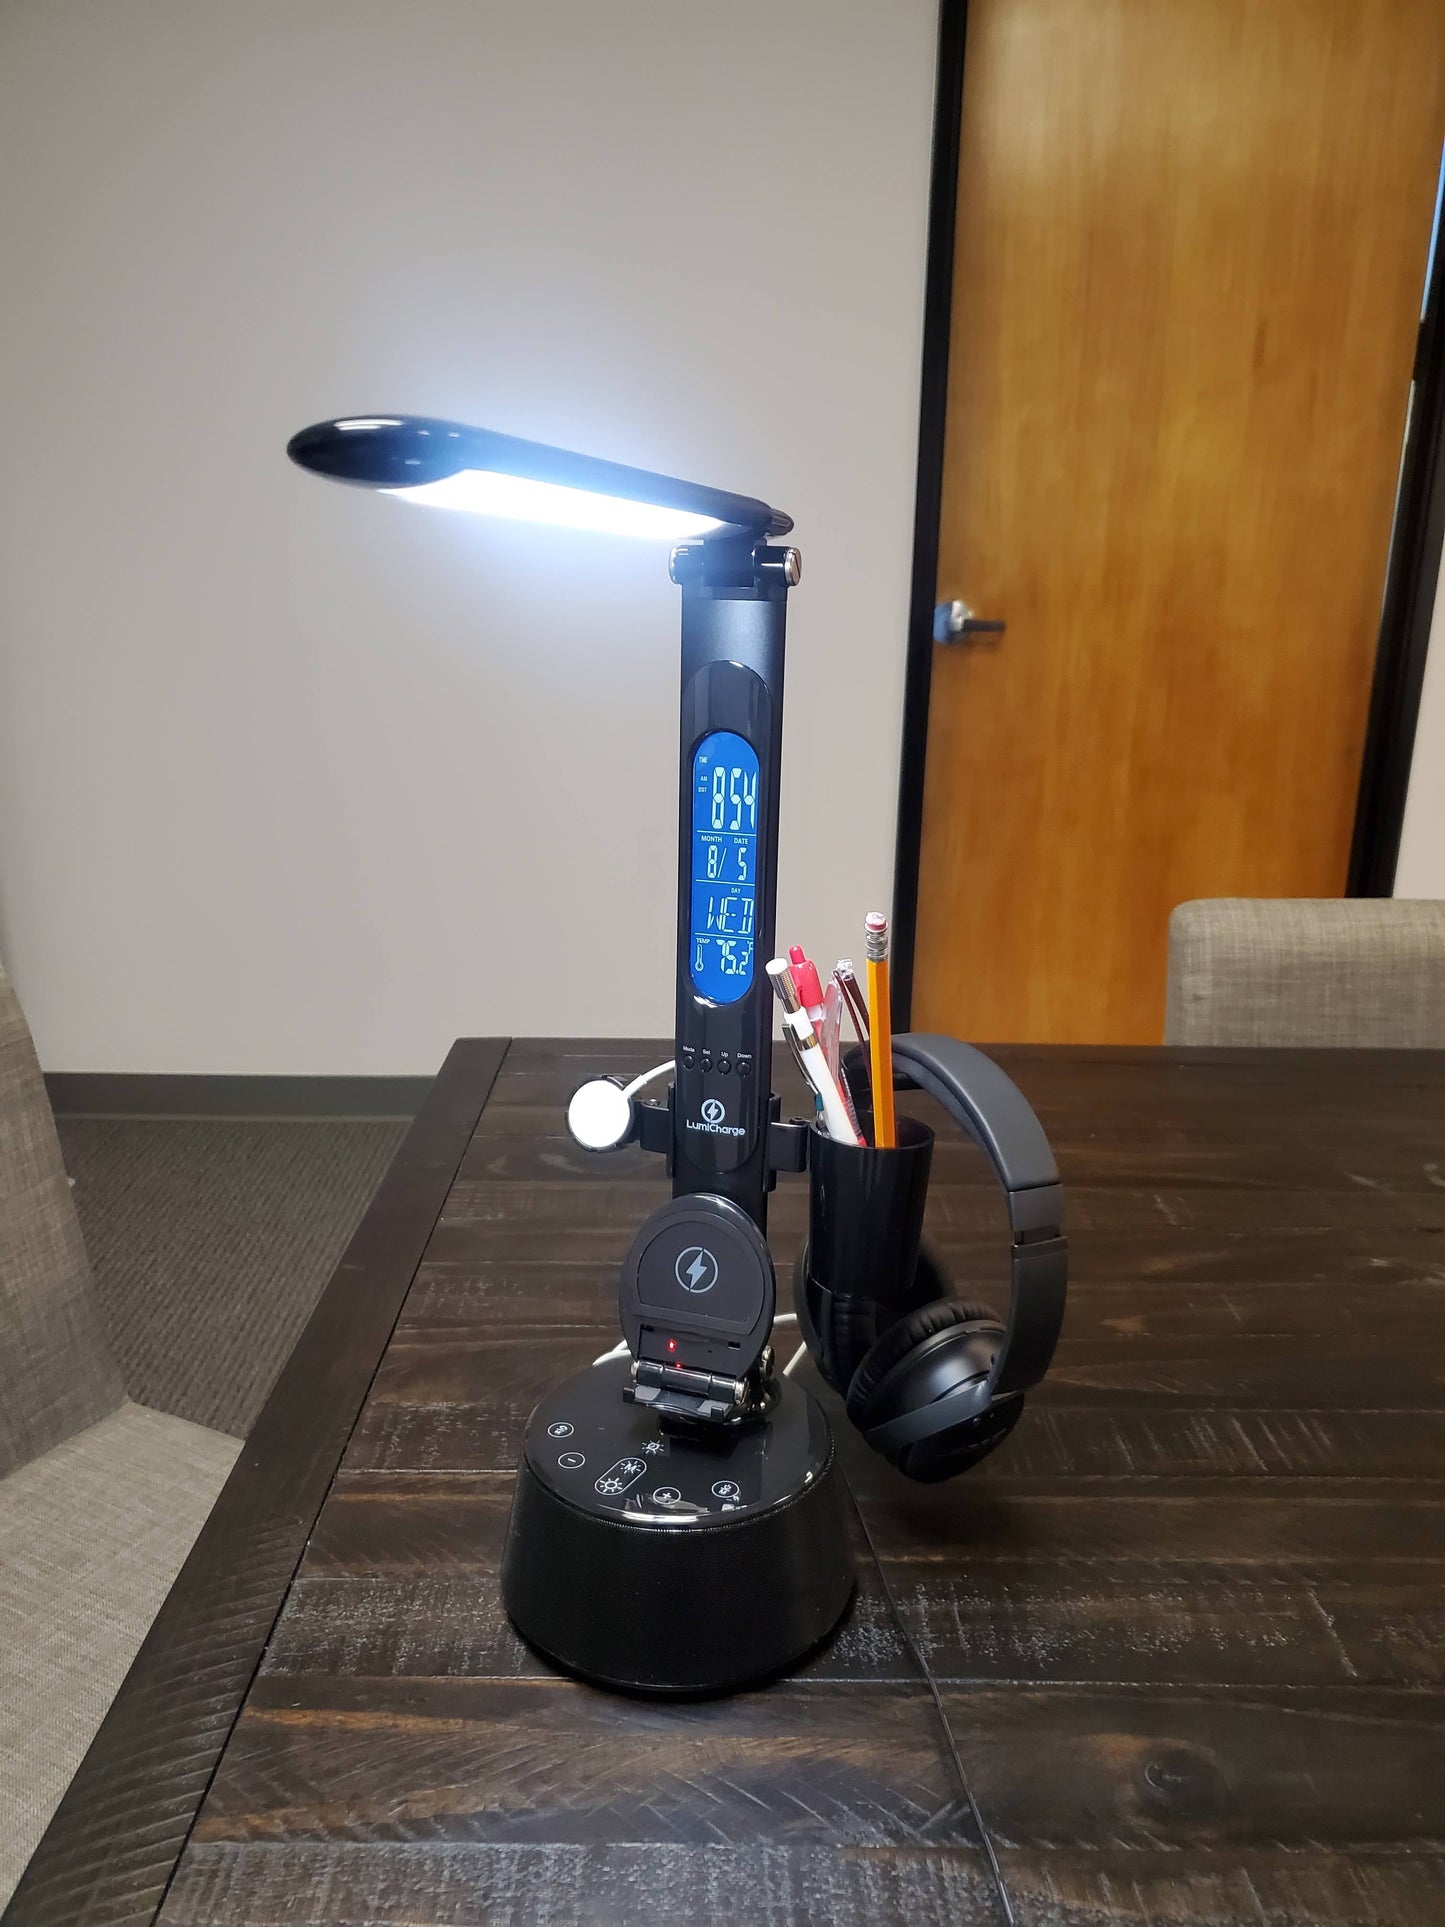 LumiChargeT2W -5 in 1- Desk Lamp, Bluetooth Speaker & Wireless Charger